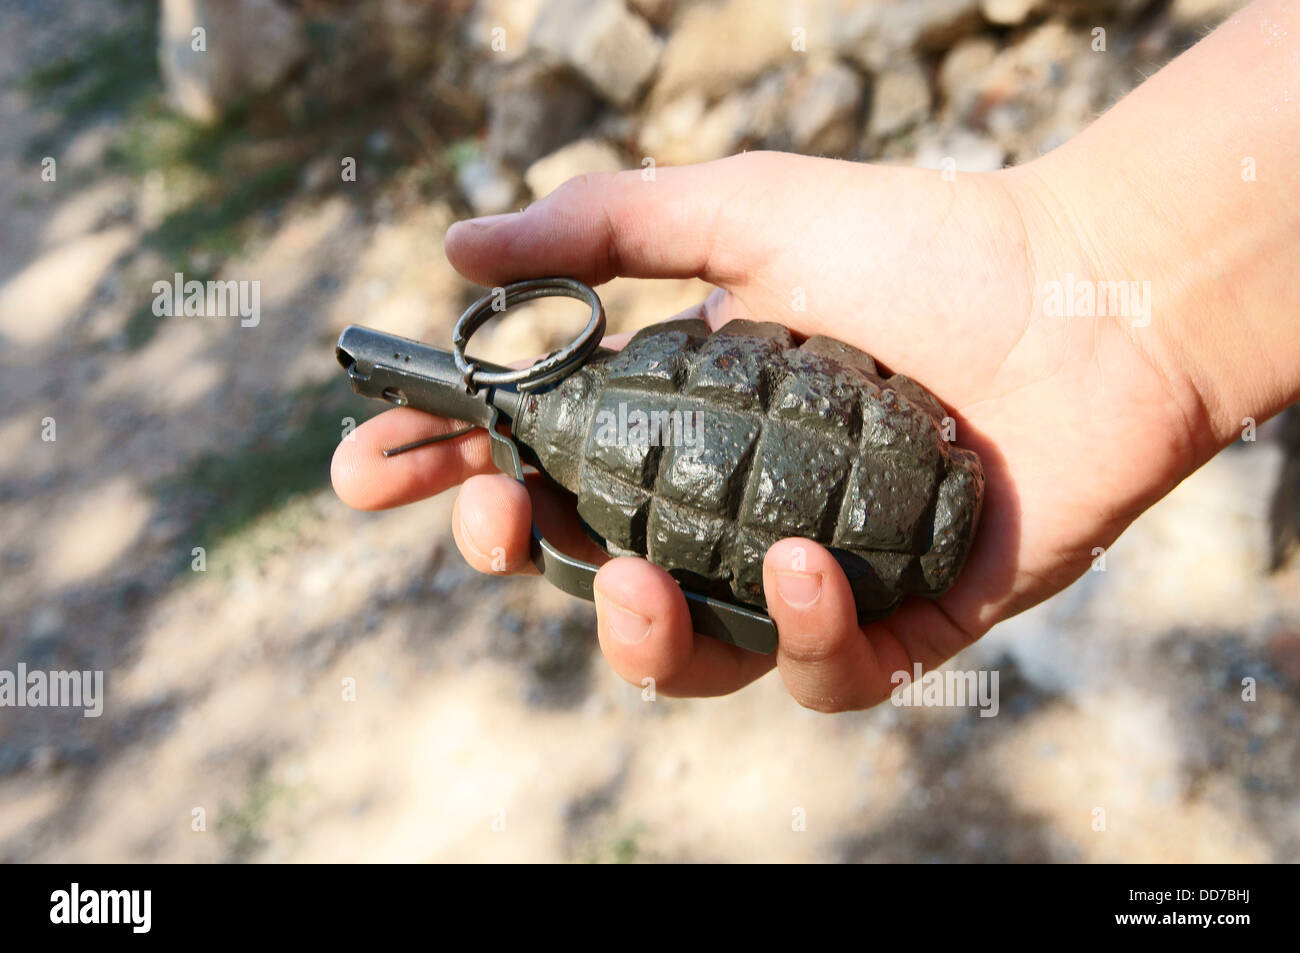 Soviet F1 egg hand grenade, weapon, young man, youngster Stock Photo